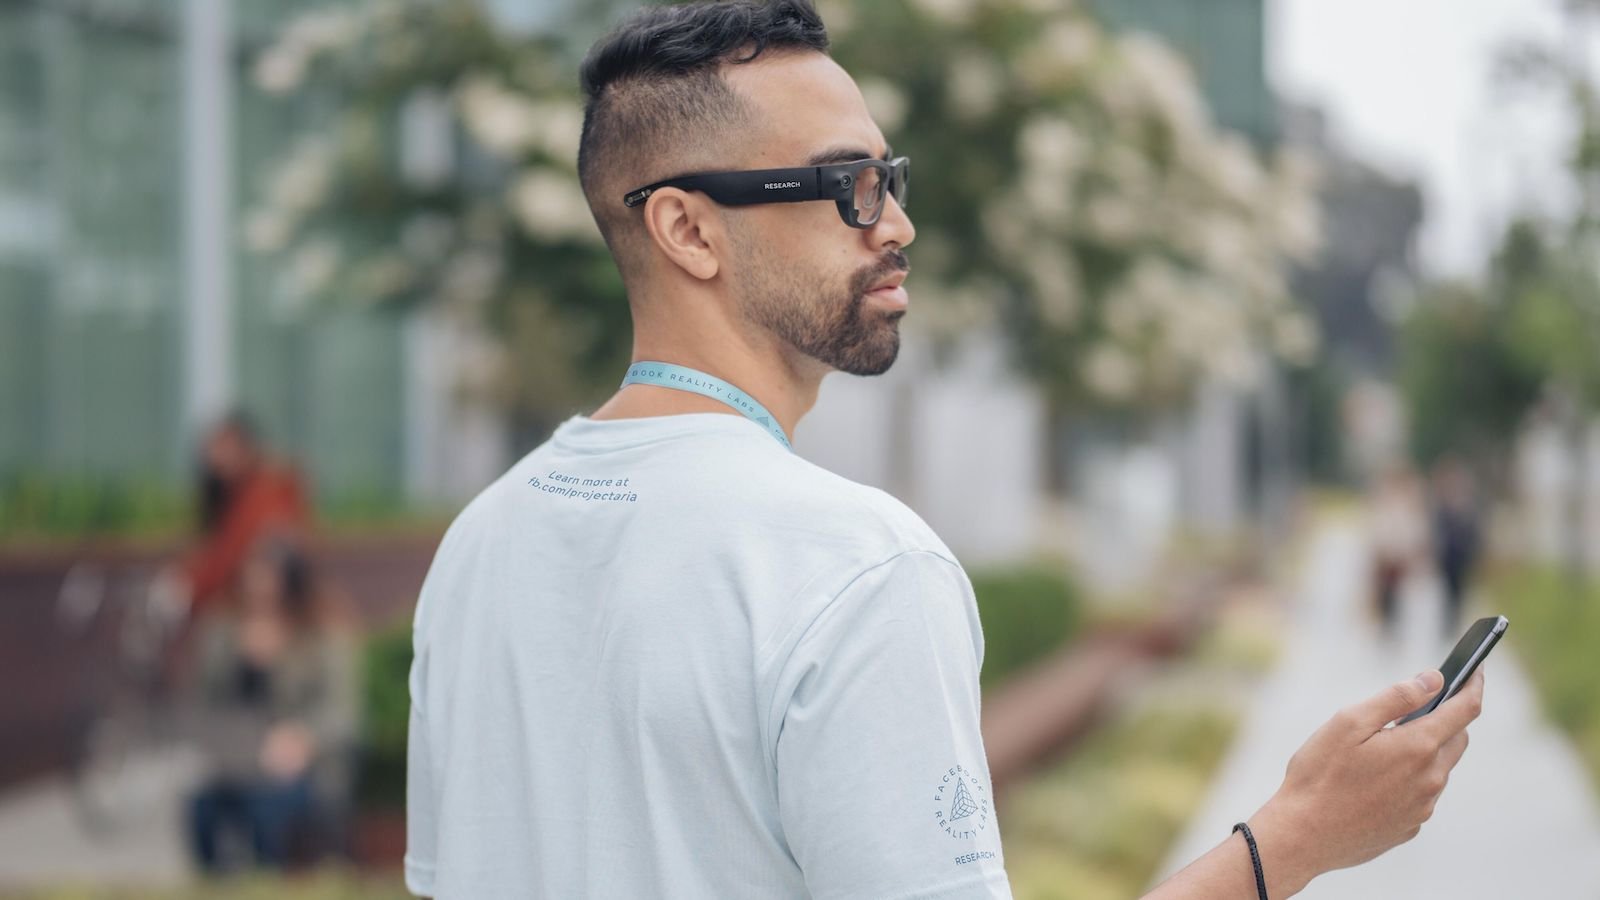 The Facebook Reality Labs Project Aria smart glasses have sensors to capture video and audio